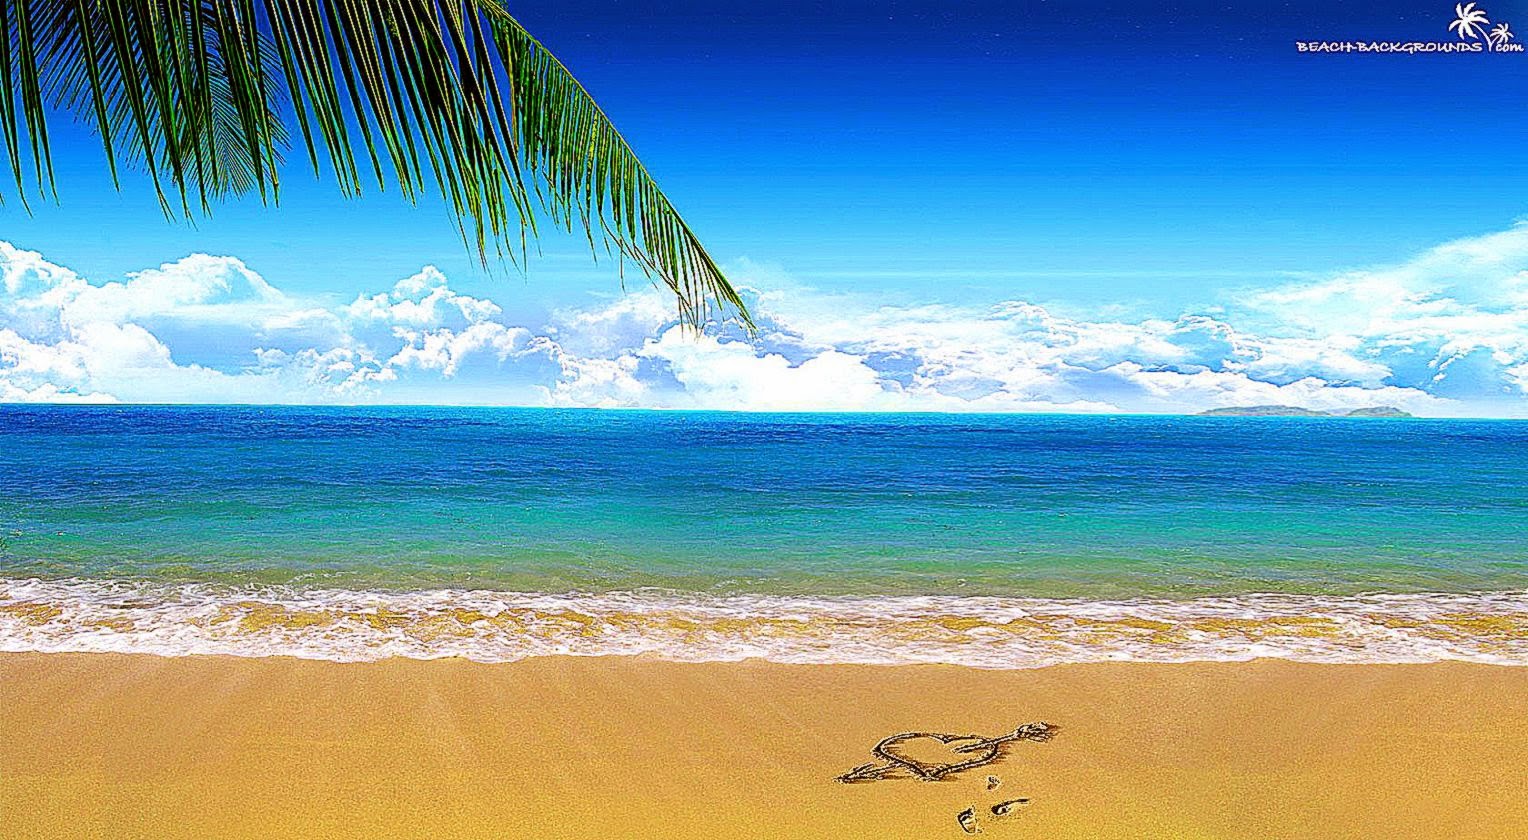 Beach Backgrounds For Photoshop | Free HD Wallpapers